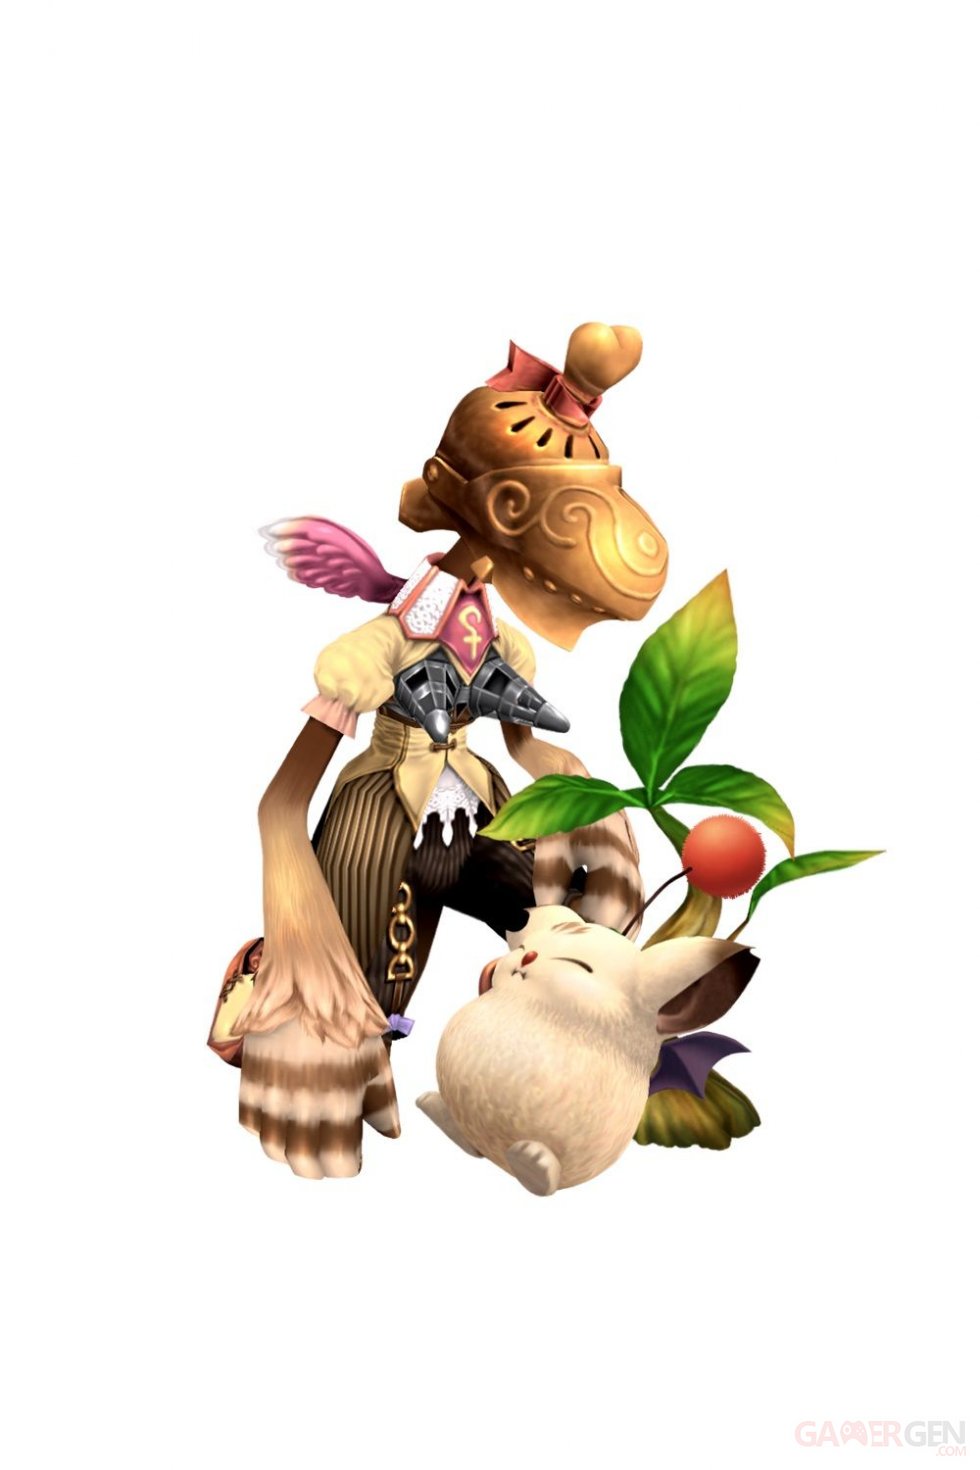 Final-Fantasy-Crystal-Chronicles-Remastered-Edition-25-13-09-2019